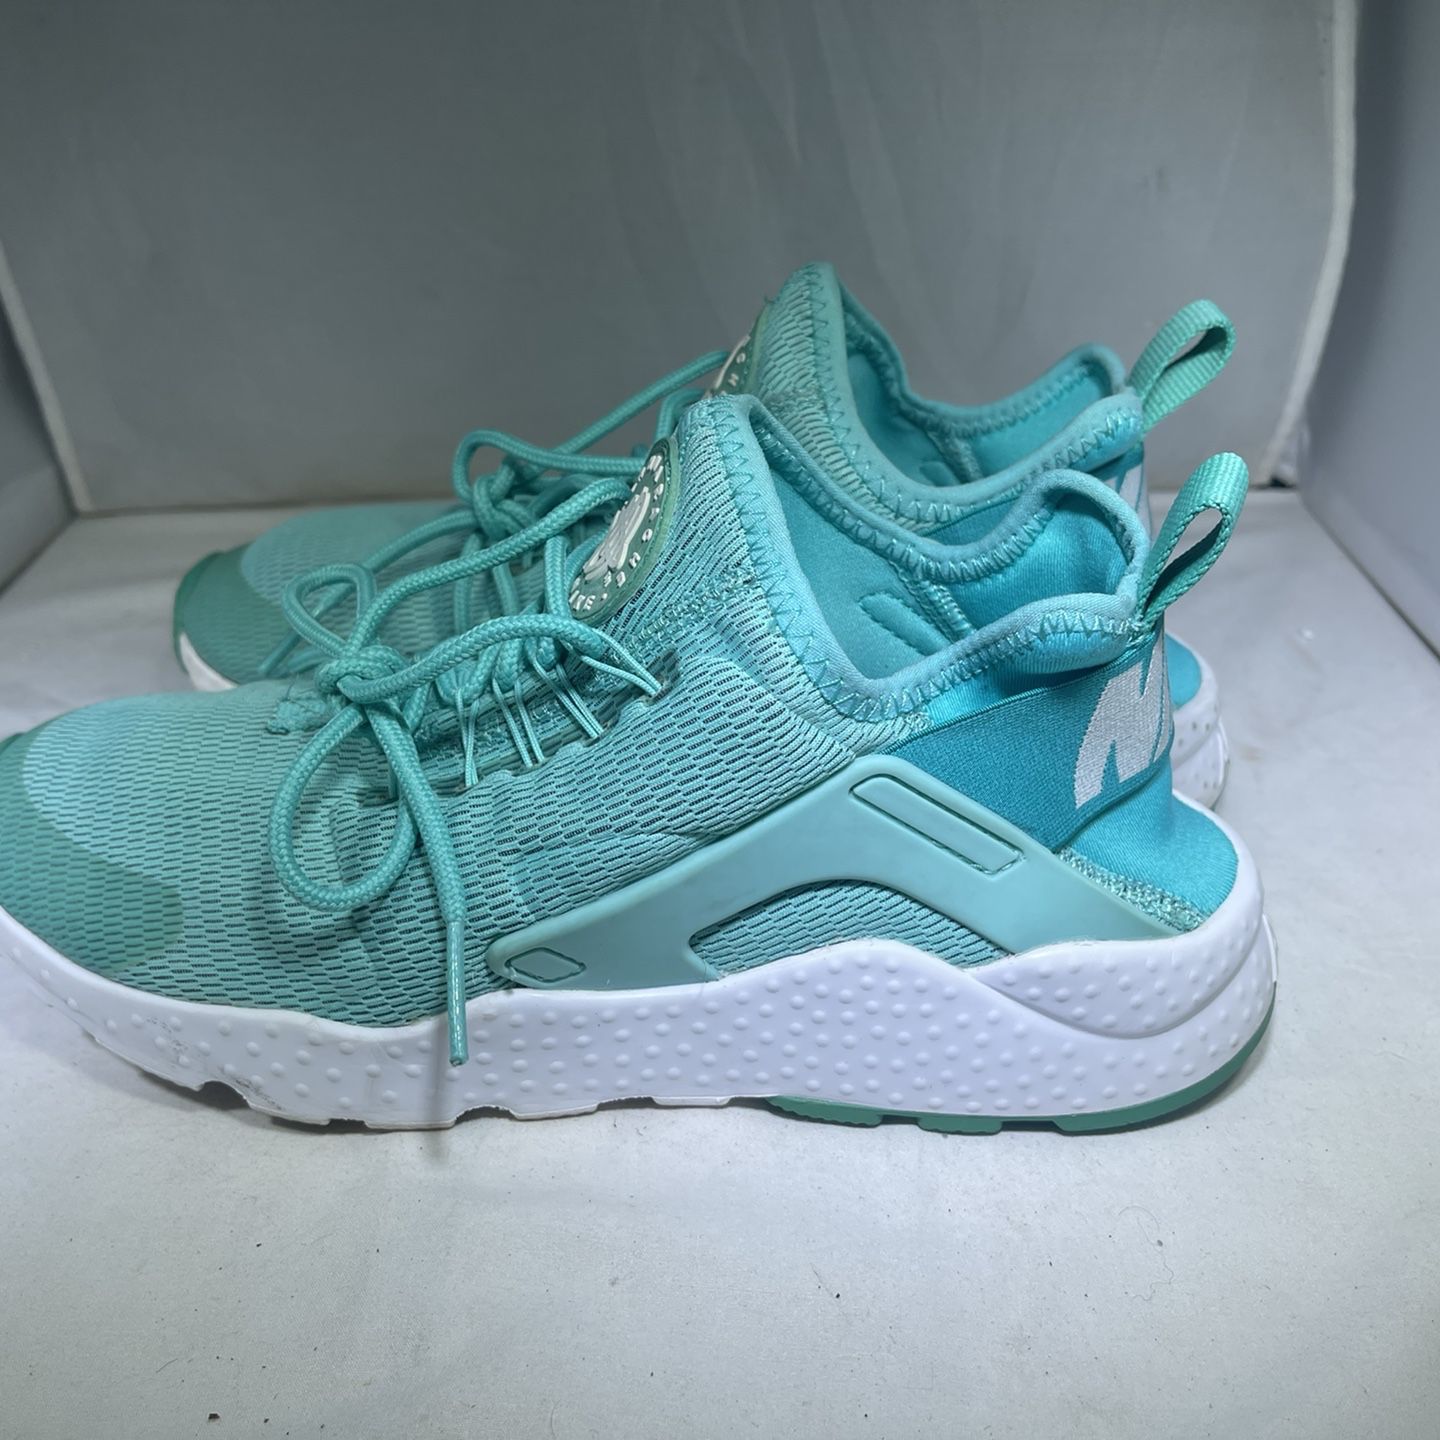 atributo Impermeable Subtropical PreOwned Nike Air Huarache Run Trainers Bright Turquoise Women's 7 for Sale  in Waipahu, HI - OfferUp